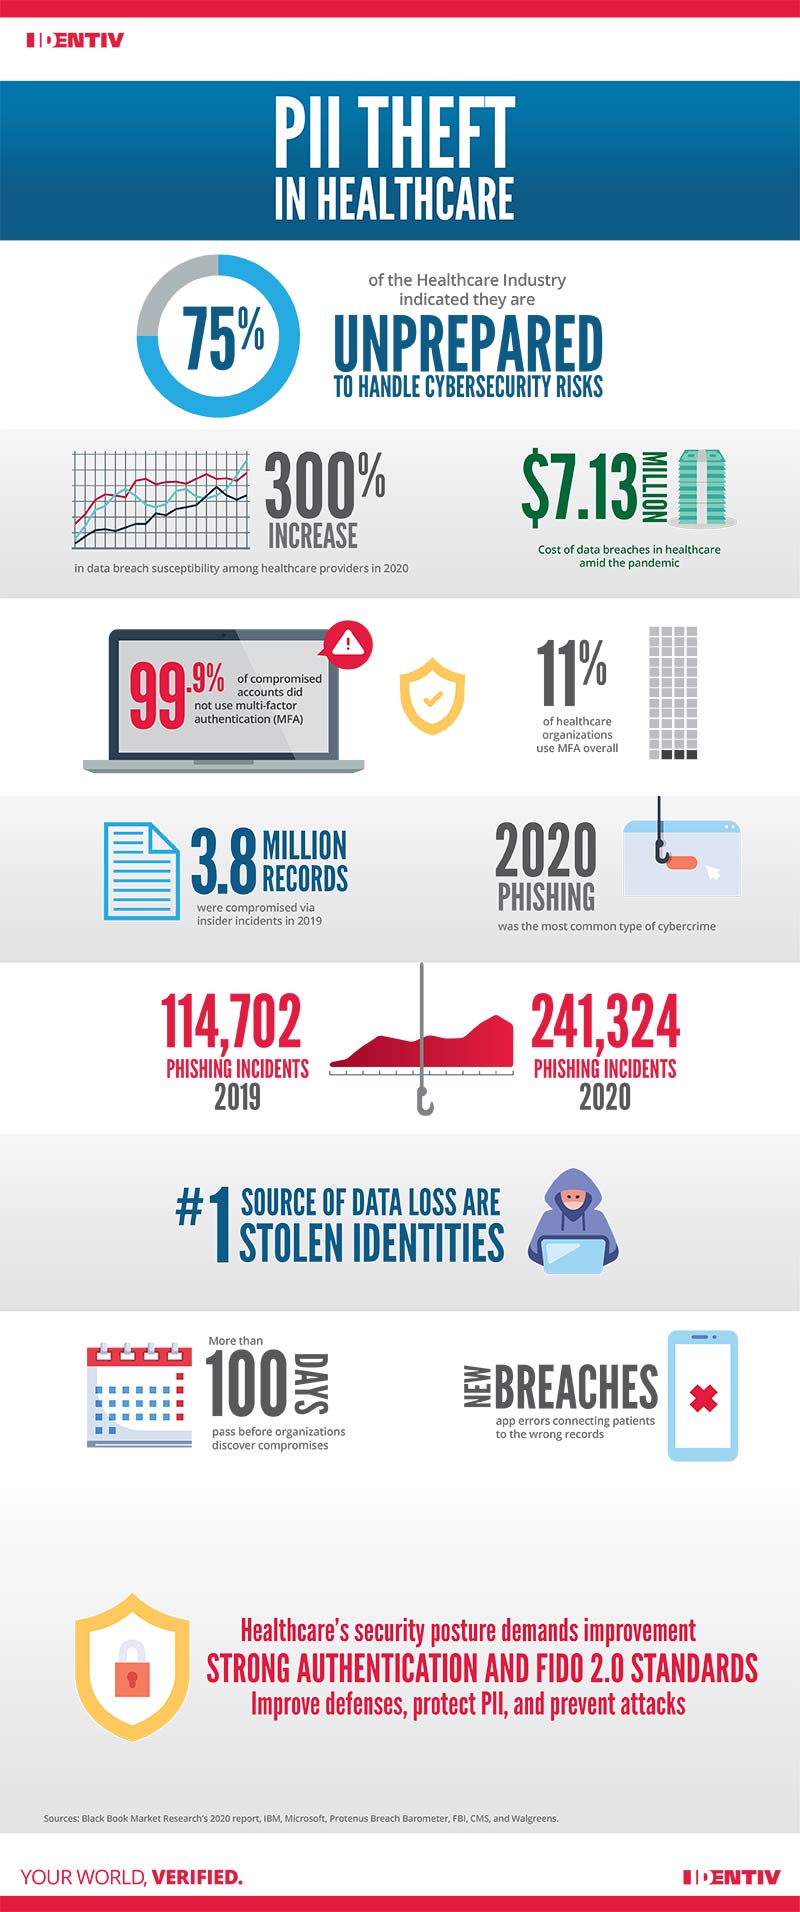 PII Theft in Healthcare Infographic by Identiv